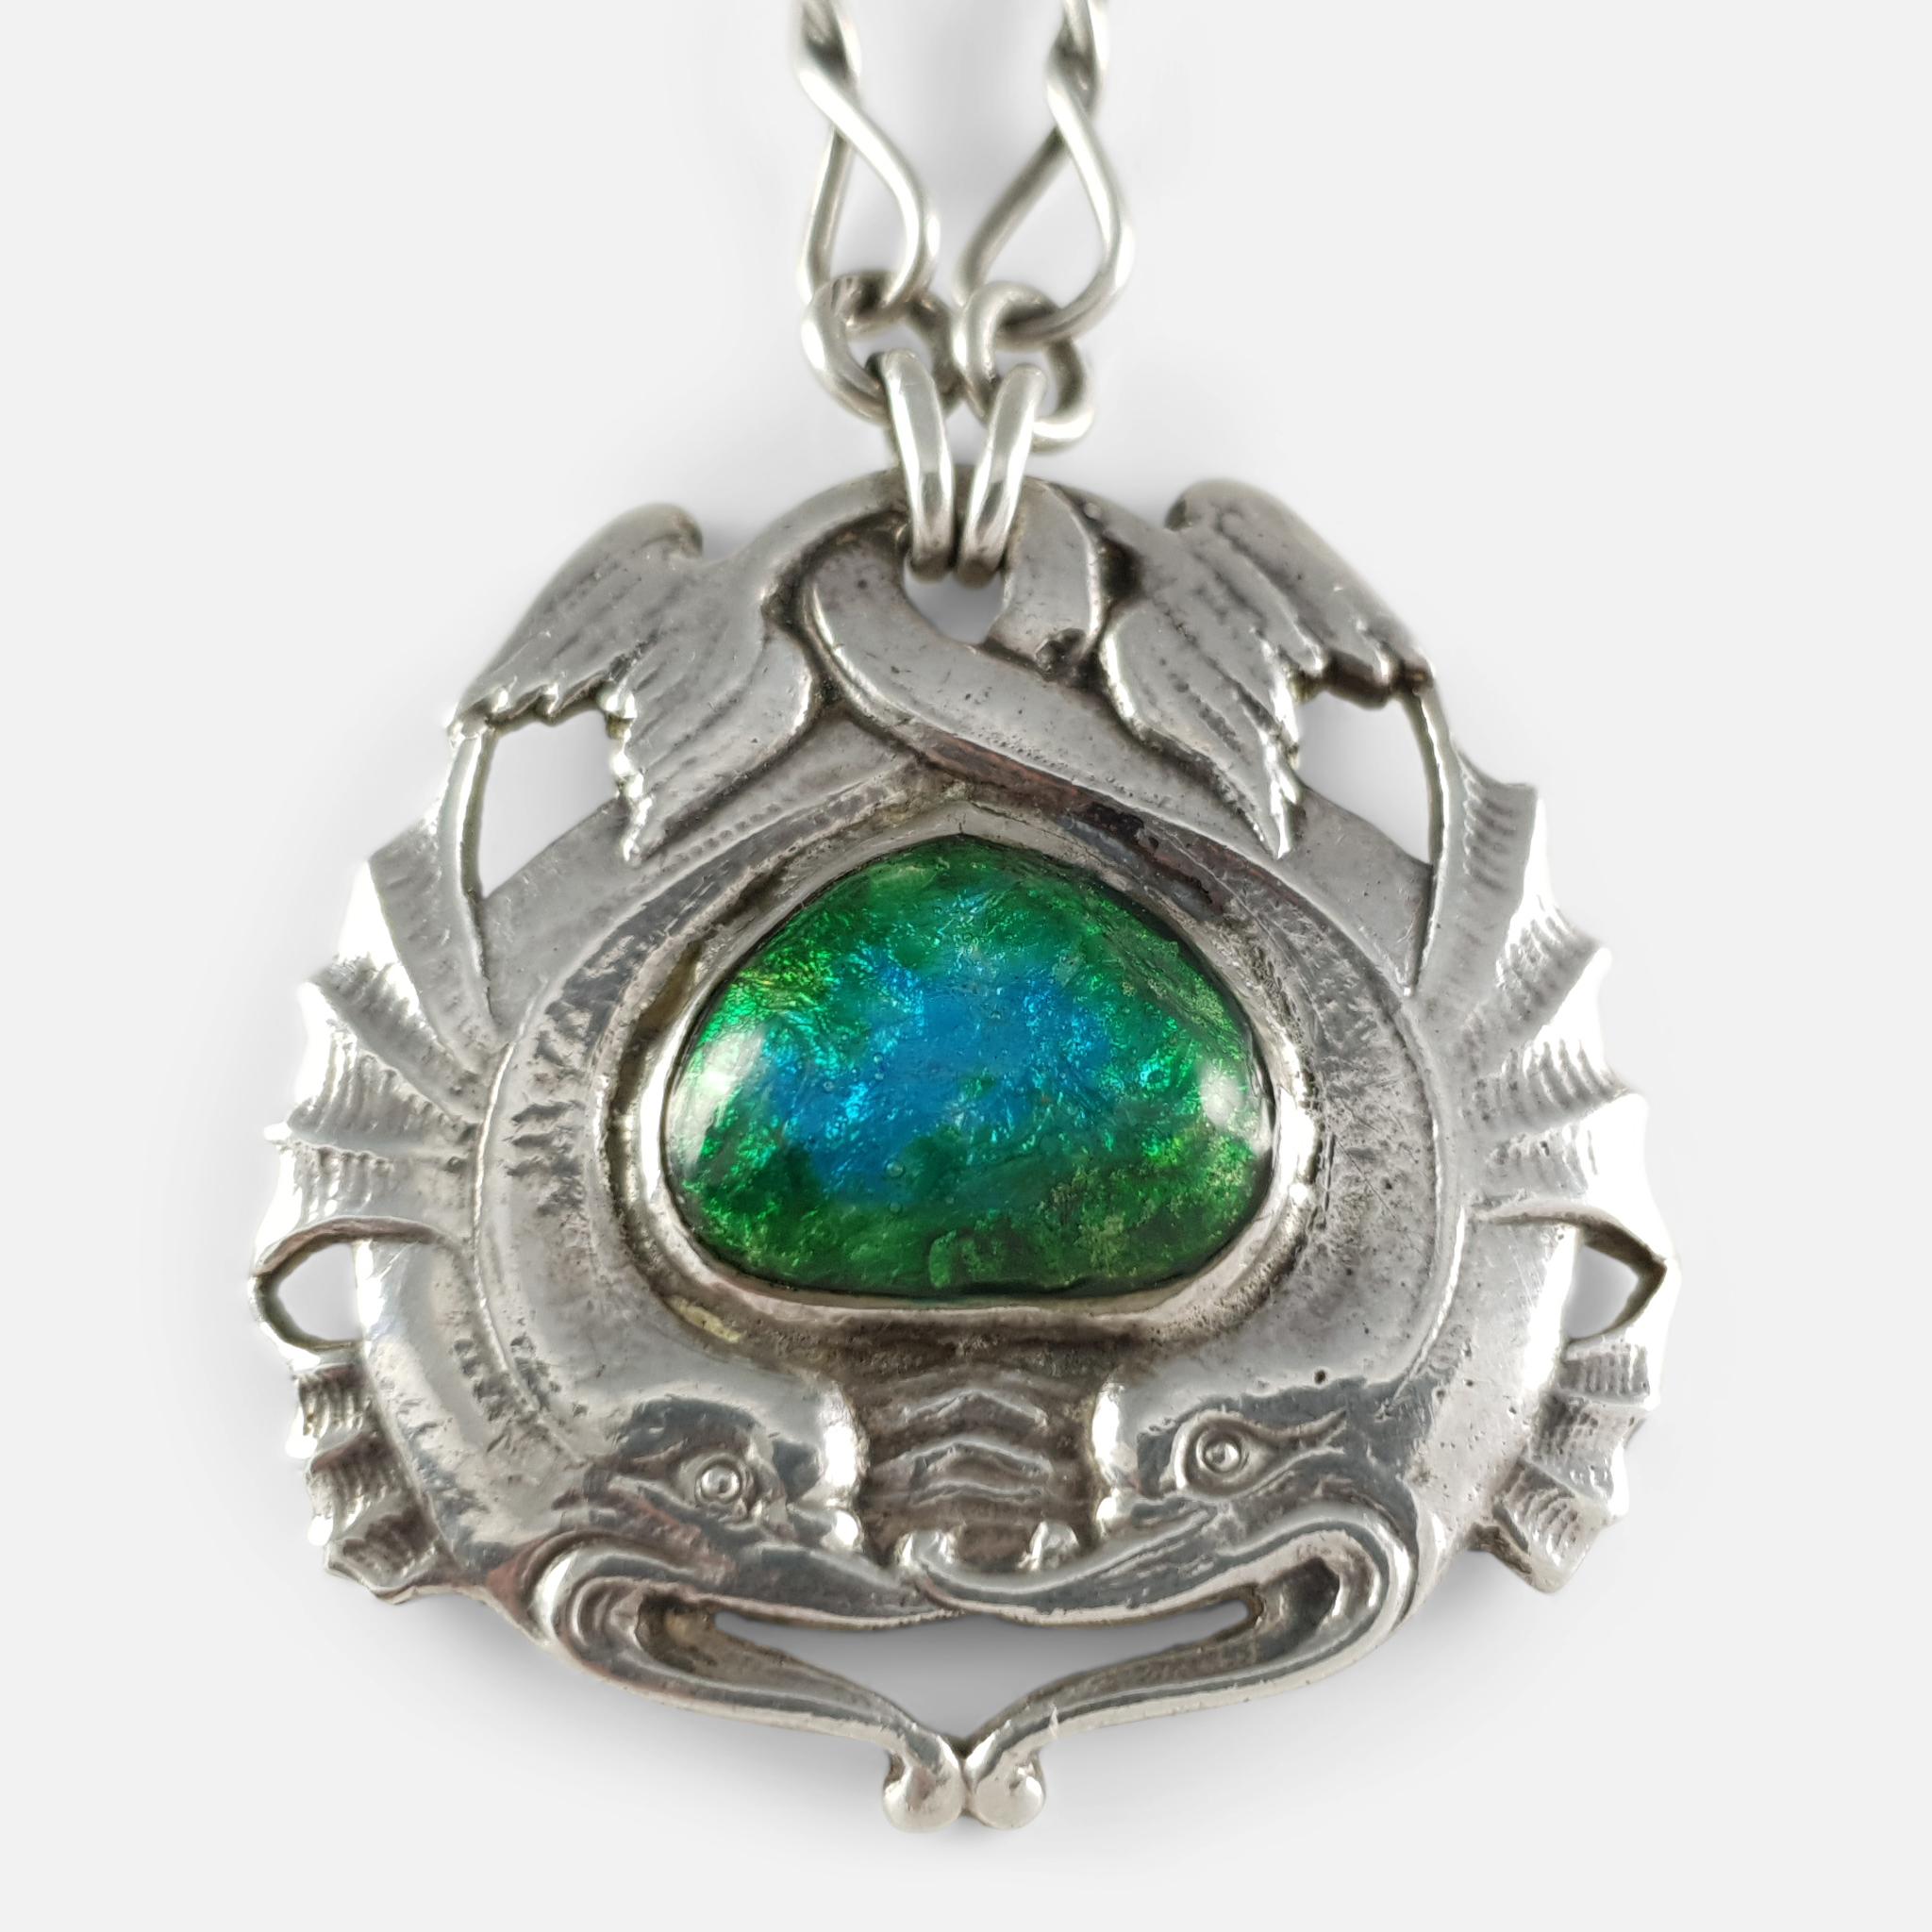 An Arts and Crafts ornamental sterling silver necklace by Ramsden & Carr. The necklace is designed as two intertwined mythical sea creatures encircling a central blue and green enamel plaque, on silver twisted-link chain, and a shield-shaped silver